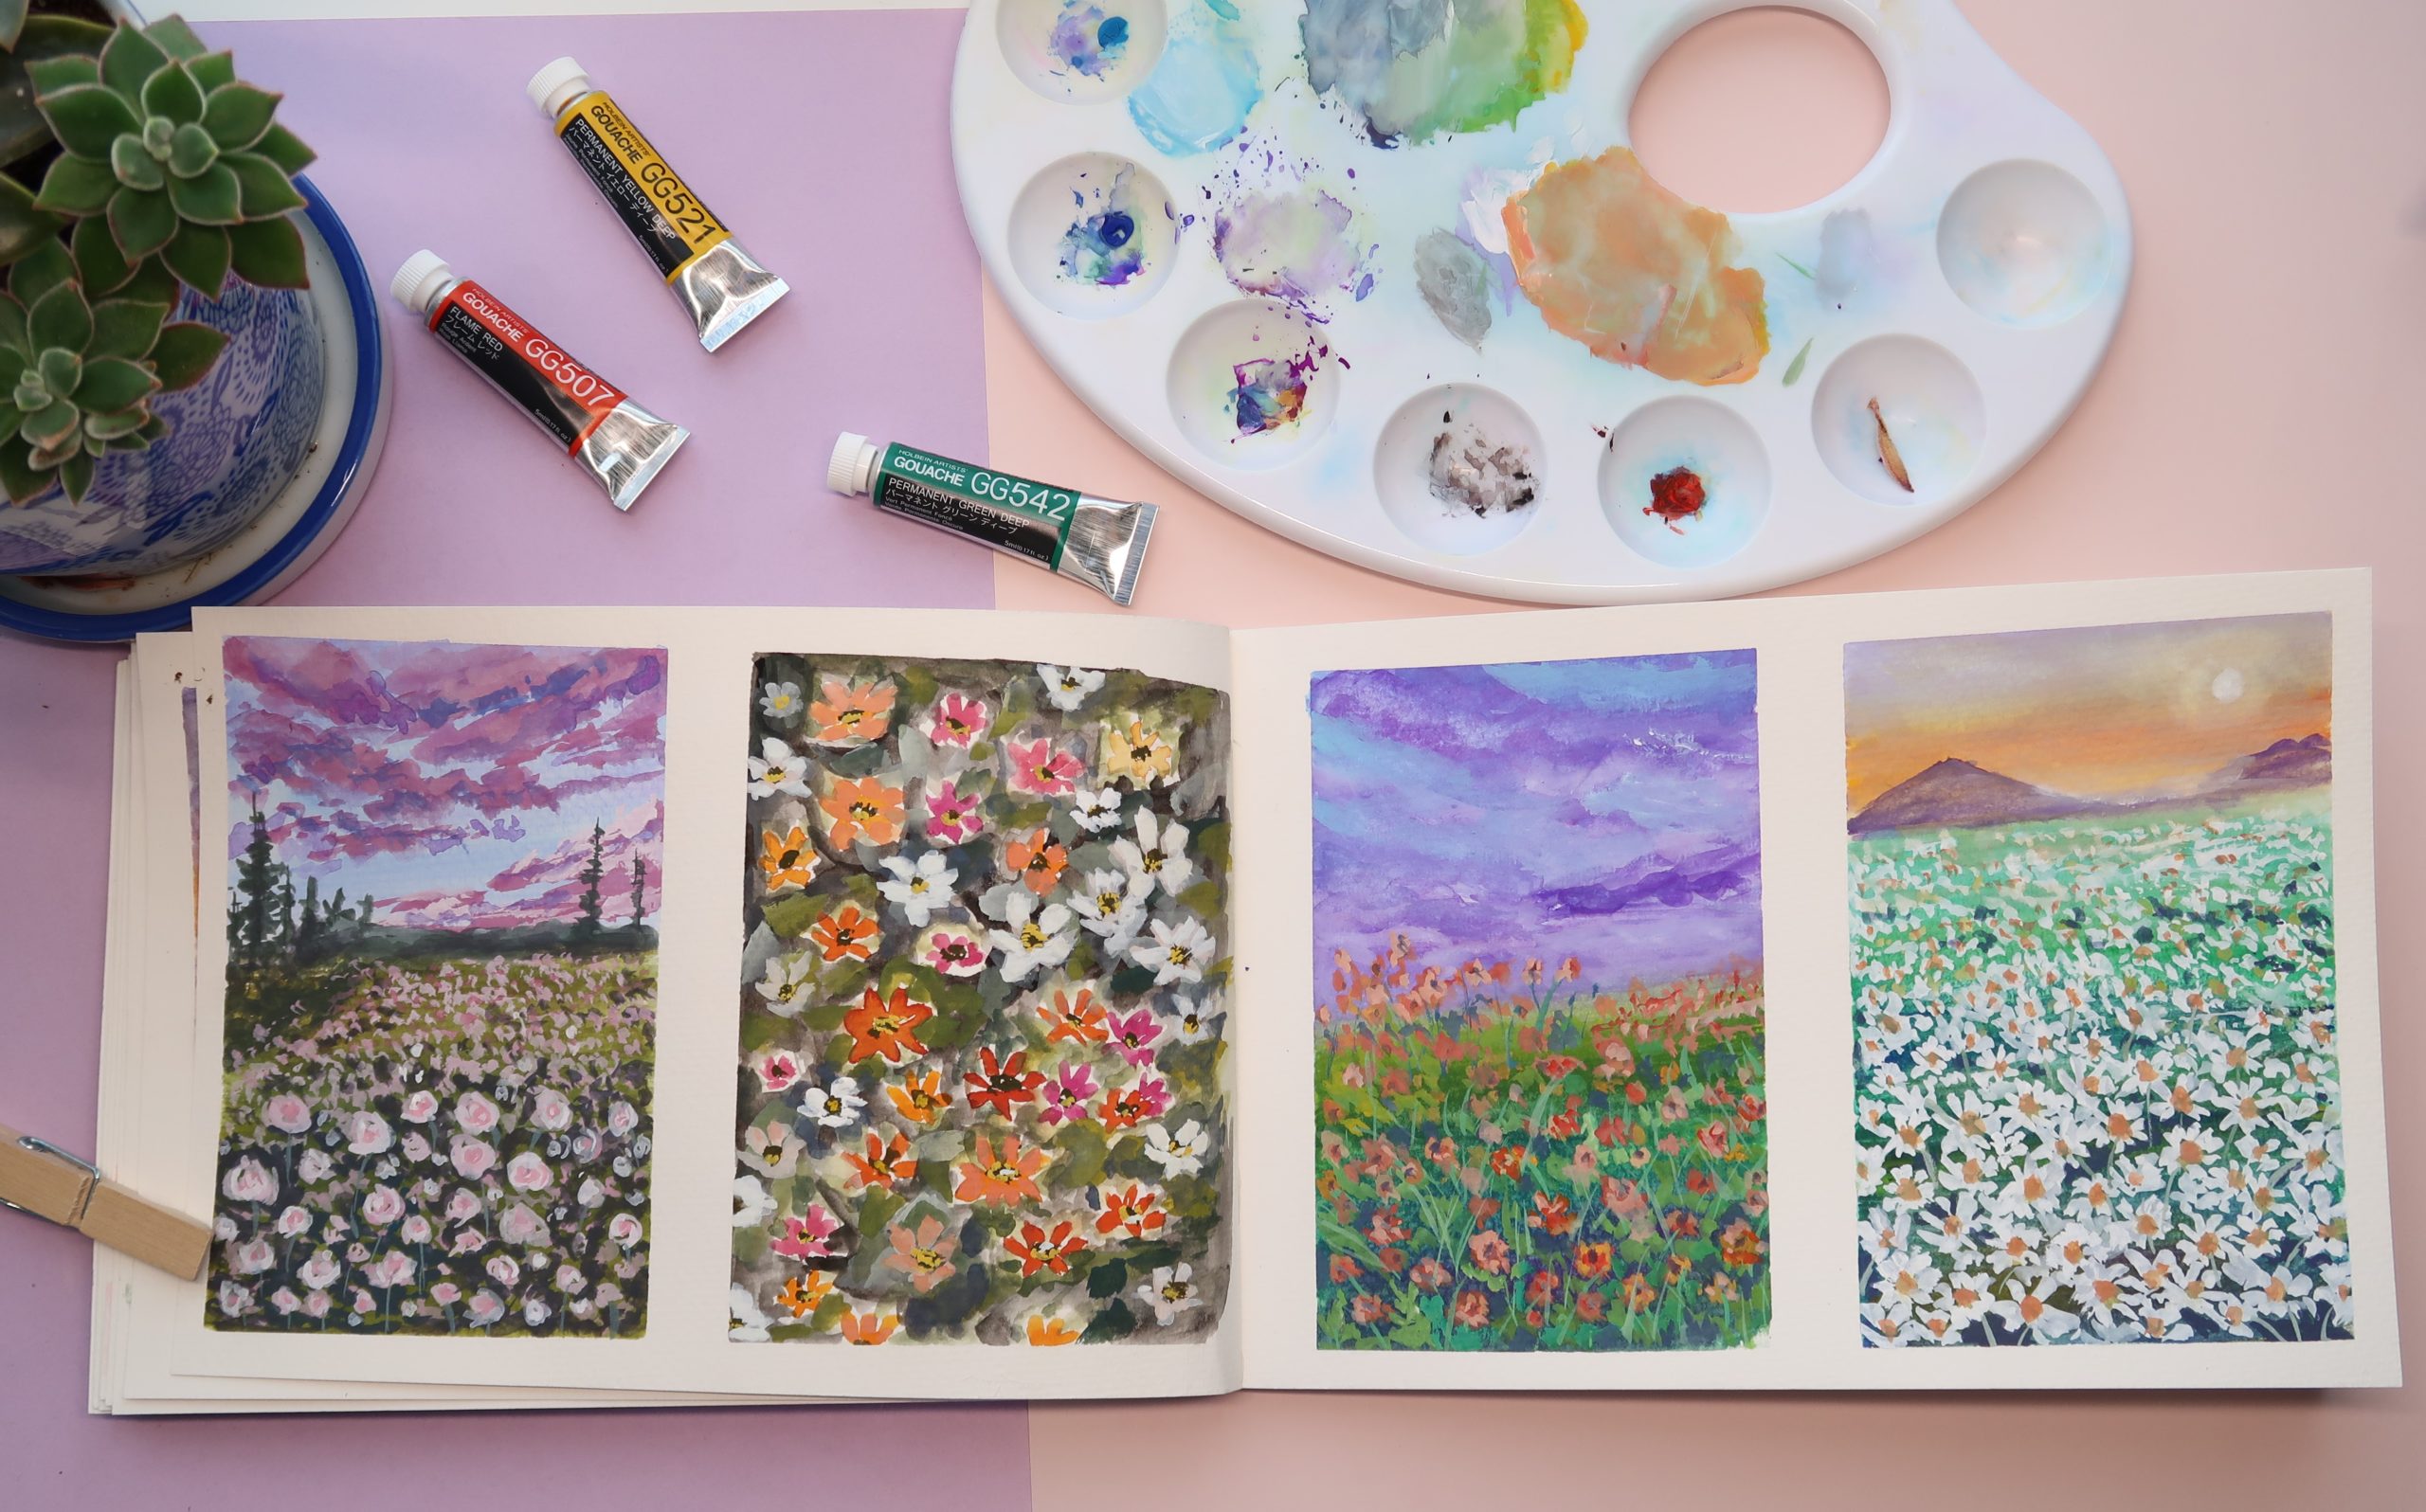 Gouache Acrylic and Watercolour Paintings on a Sketchbook